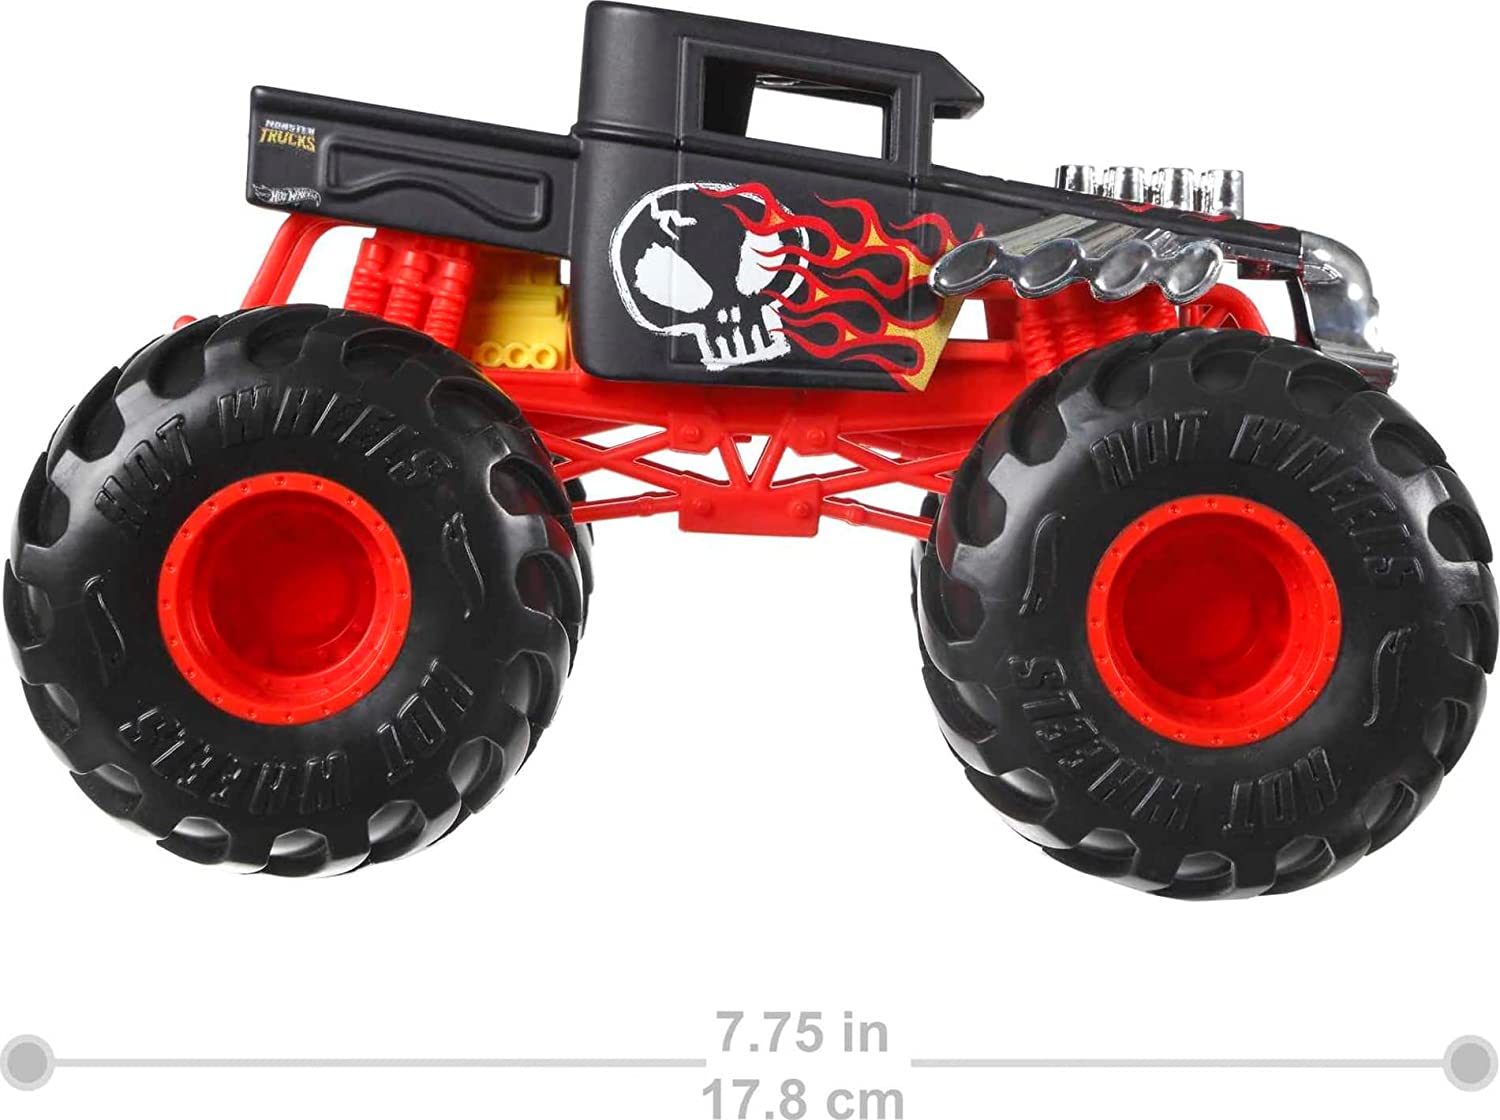 Hot Wheels 1:24 Scale Oversized Monster Truck Bone Shaker Die-Cast Toy Truck with Giant Wheels and Cool Designs